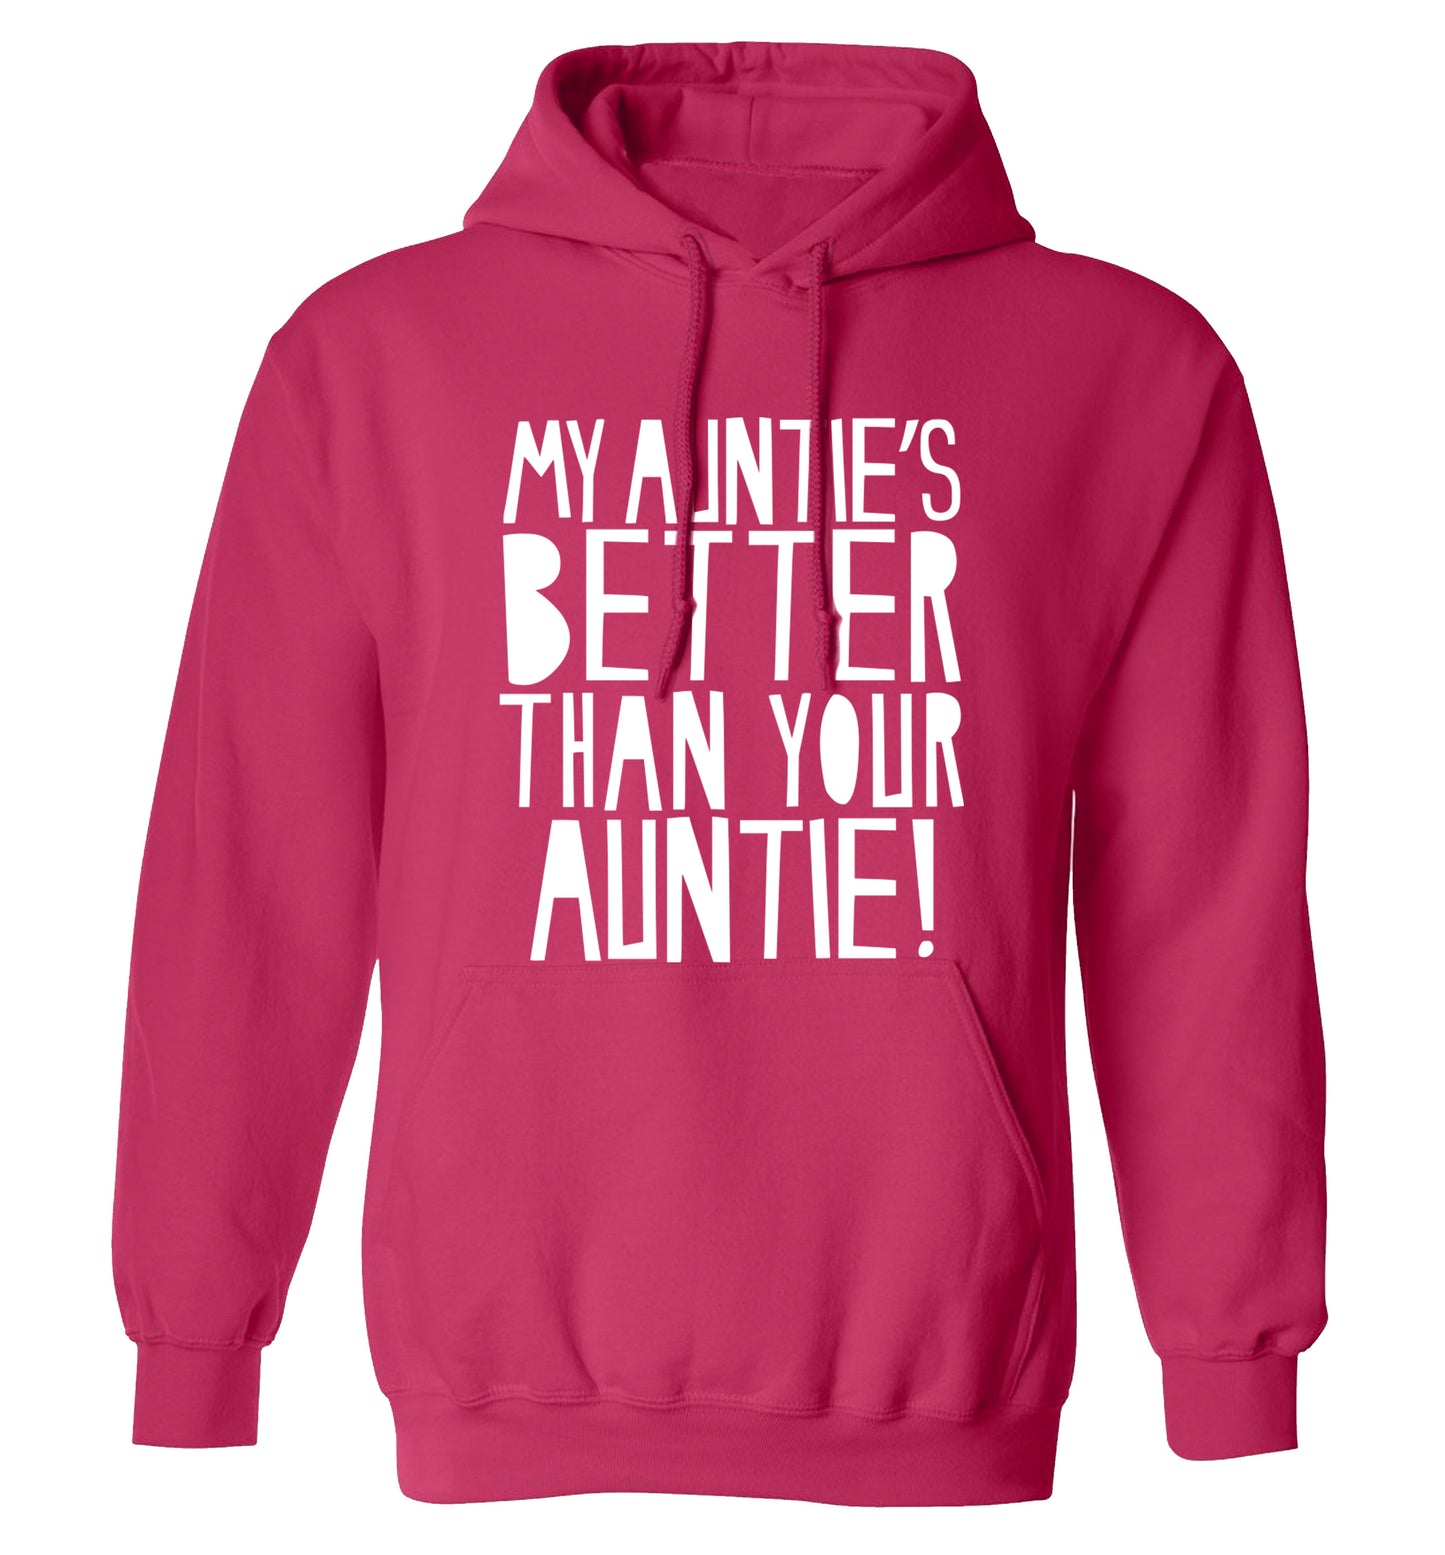 My auntie's better than your auntie adults unisex pink hoodie 2XL